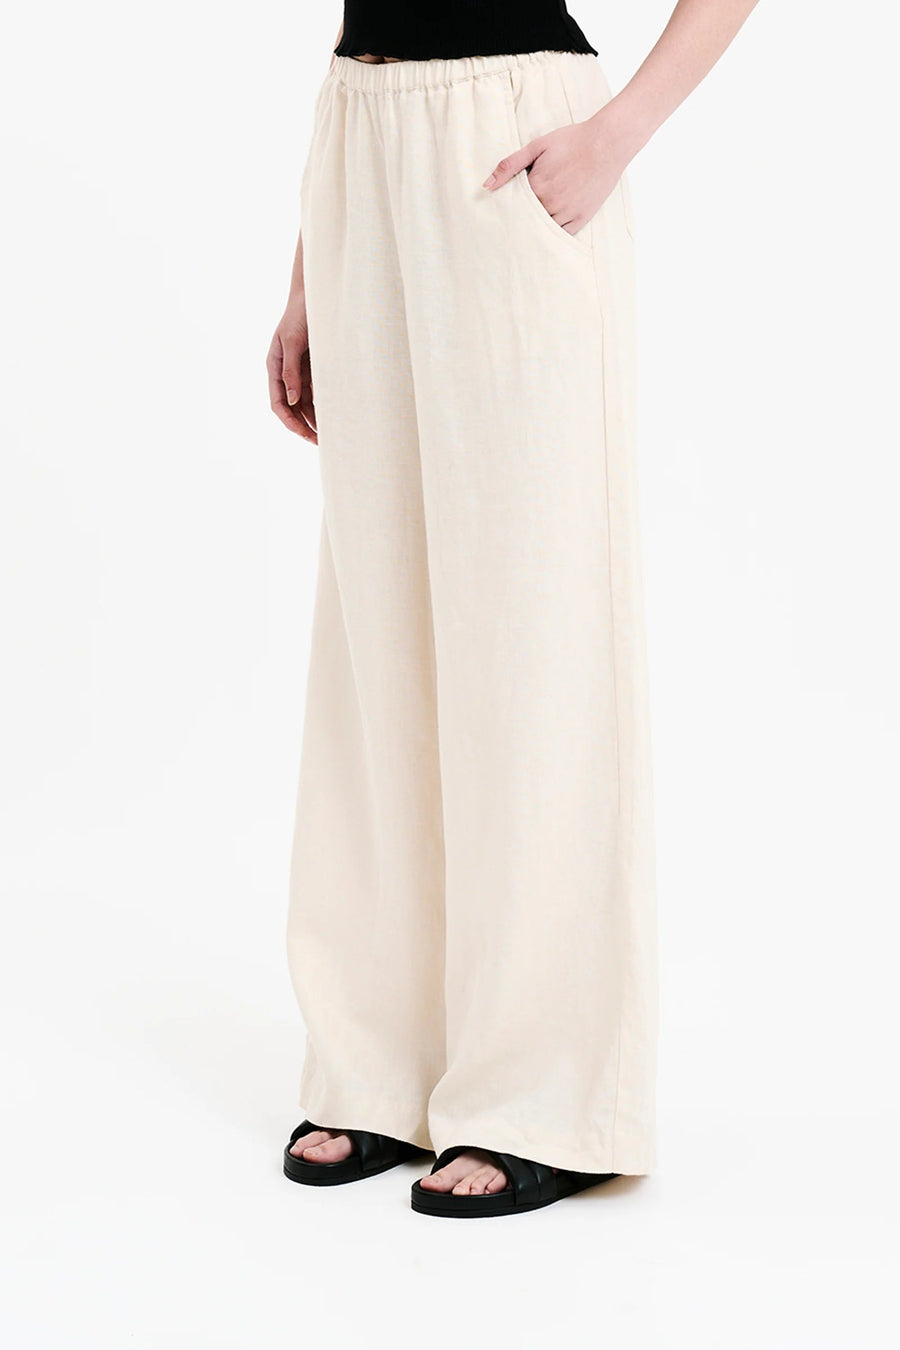 Shop Ceres Linen Pants Cloud - At Kohl and Soda | Ready To Ship!